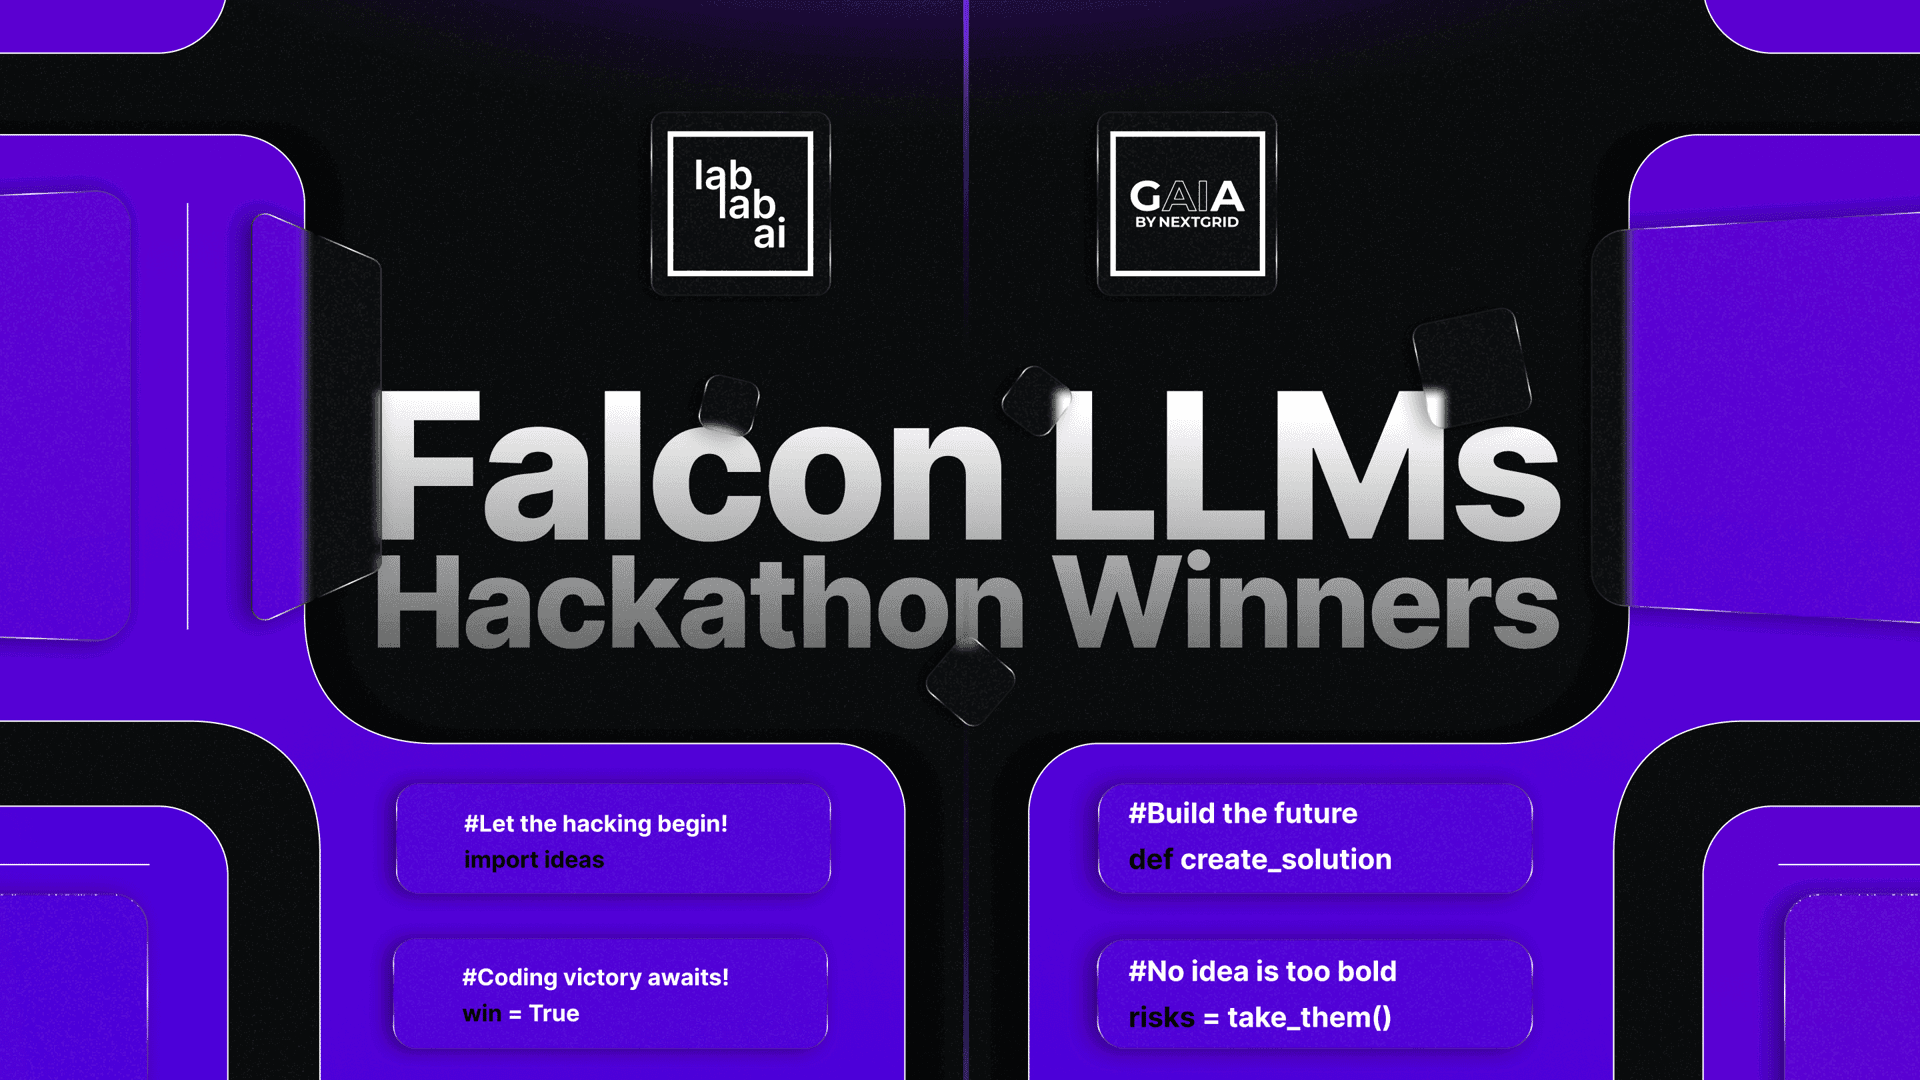 Falcon LLMs Hackathon Sponsored by GAIA: Unveiling Winners & the Future of AI